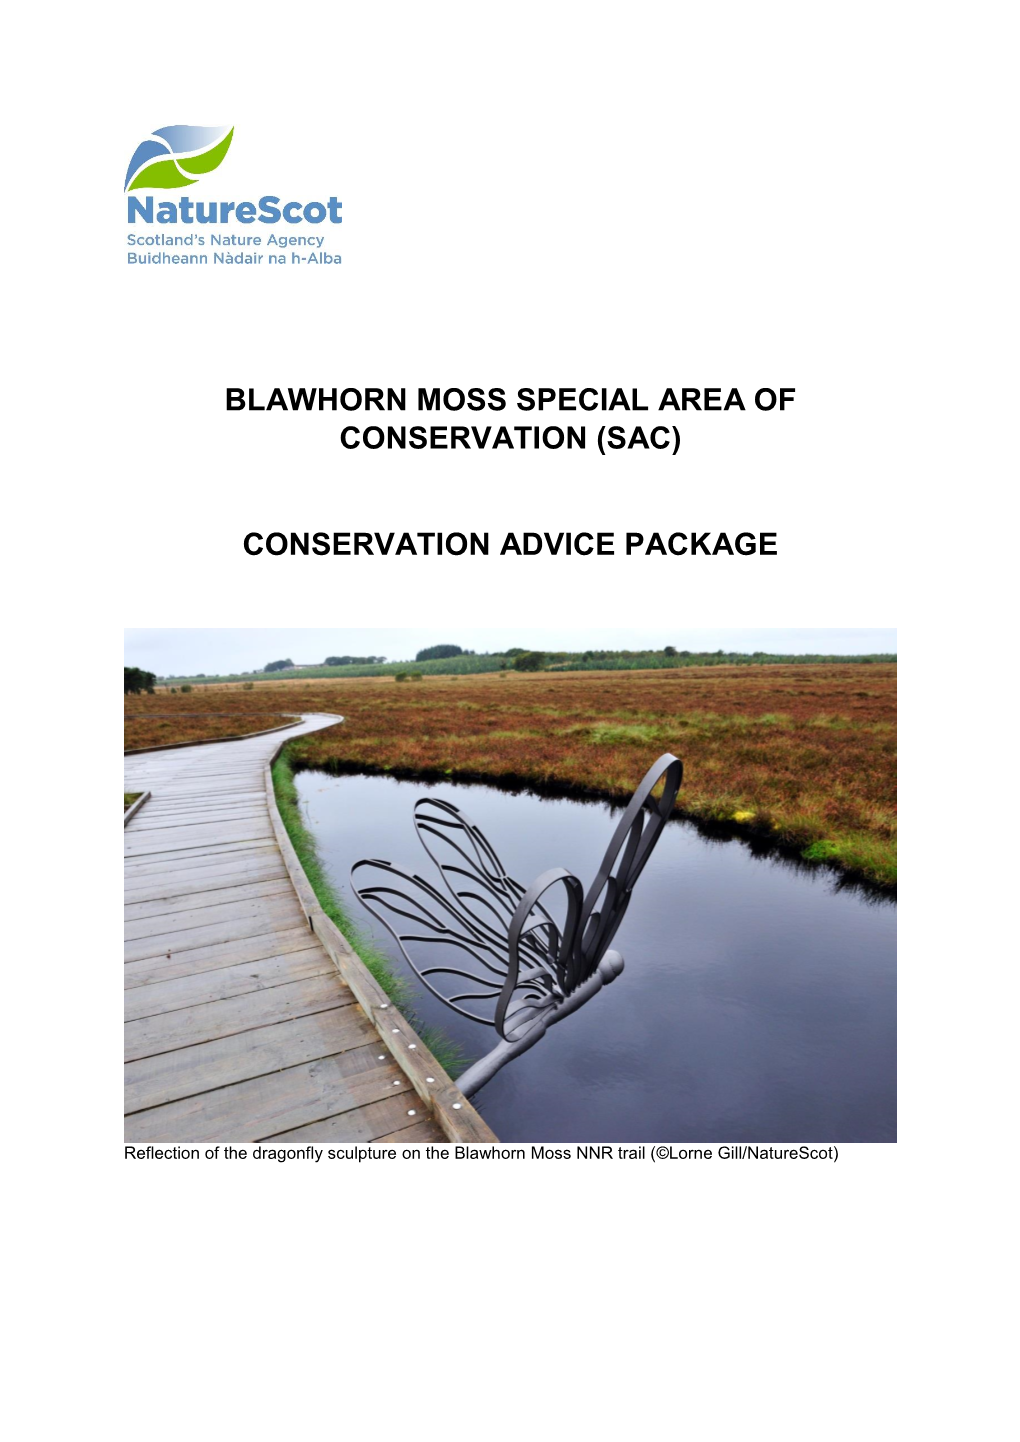 Blawhorn Moss Special Area of Conservation (Sac)